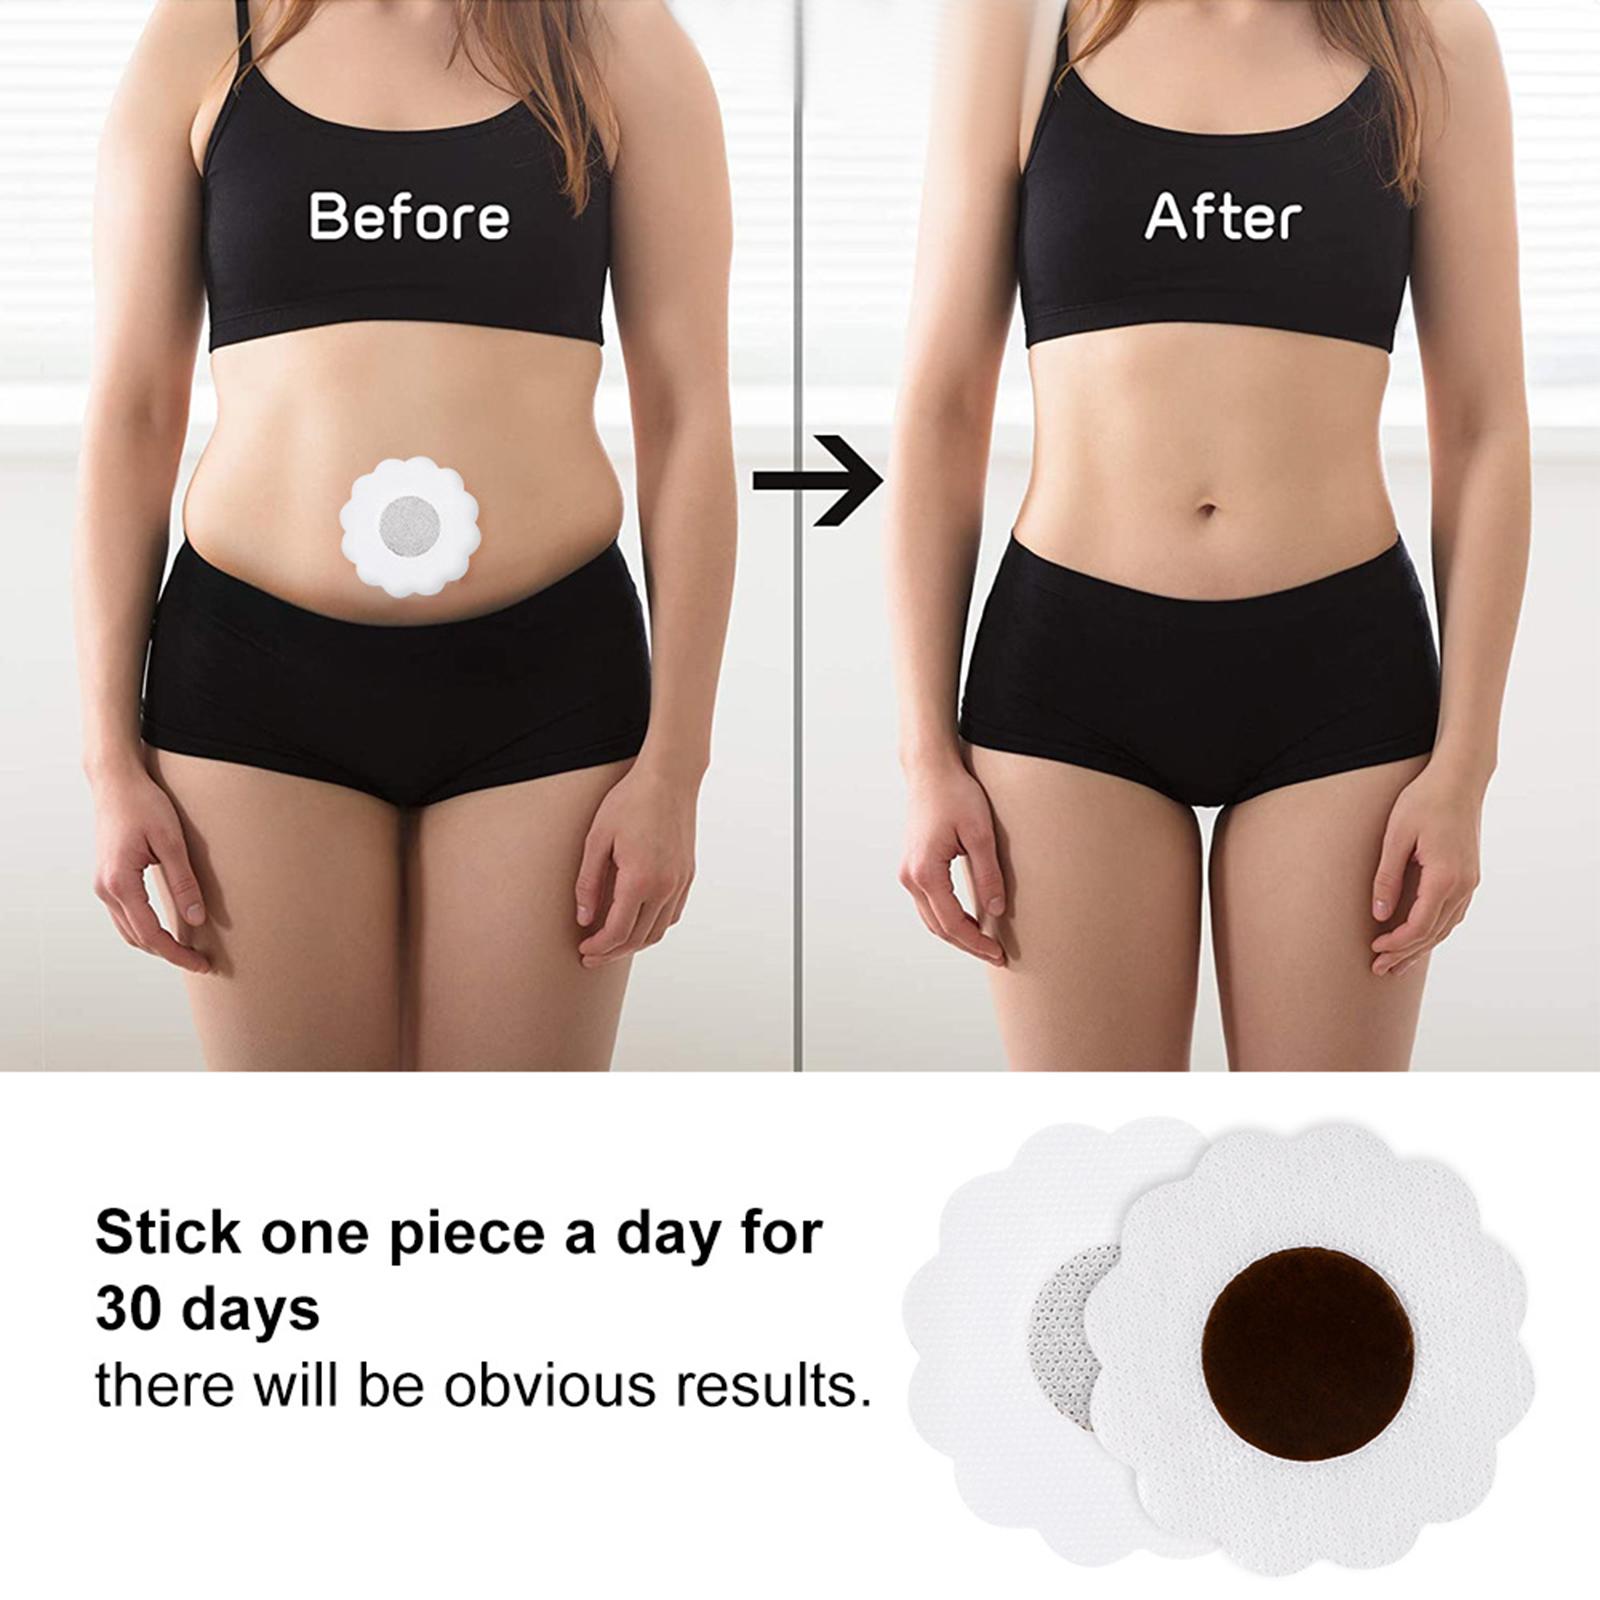 Sumifun 8 Patches Slim Patch Lose Weight Plaster Slimming Sticker Burning Fat Body Beauty Shaper Slim Pad Boost Metabolism